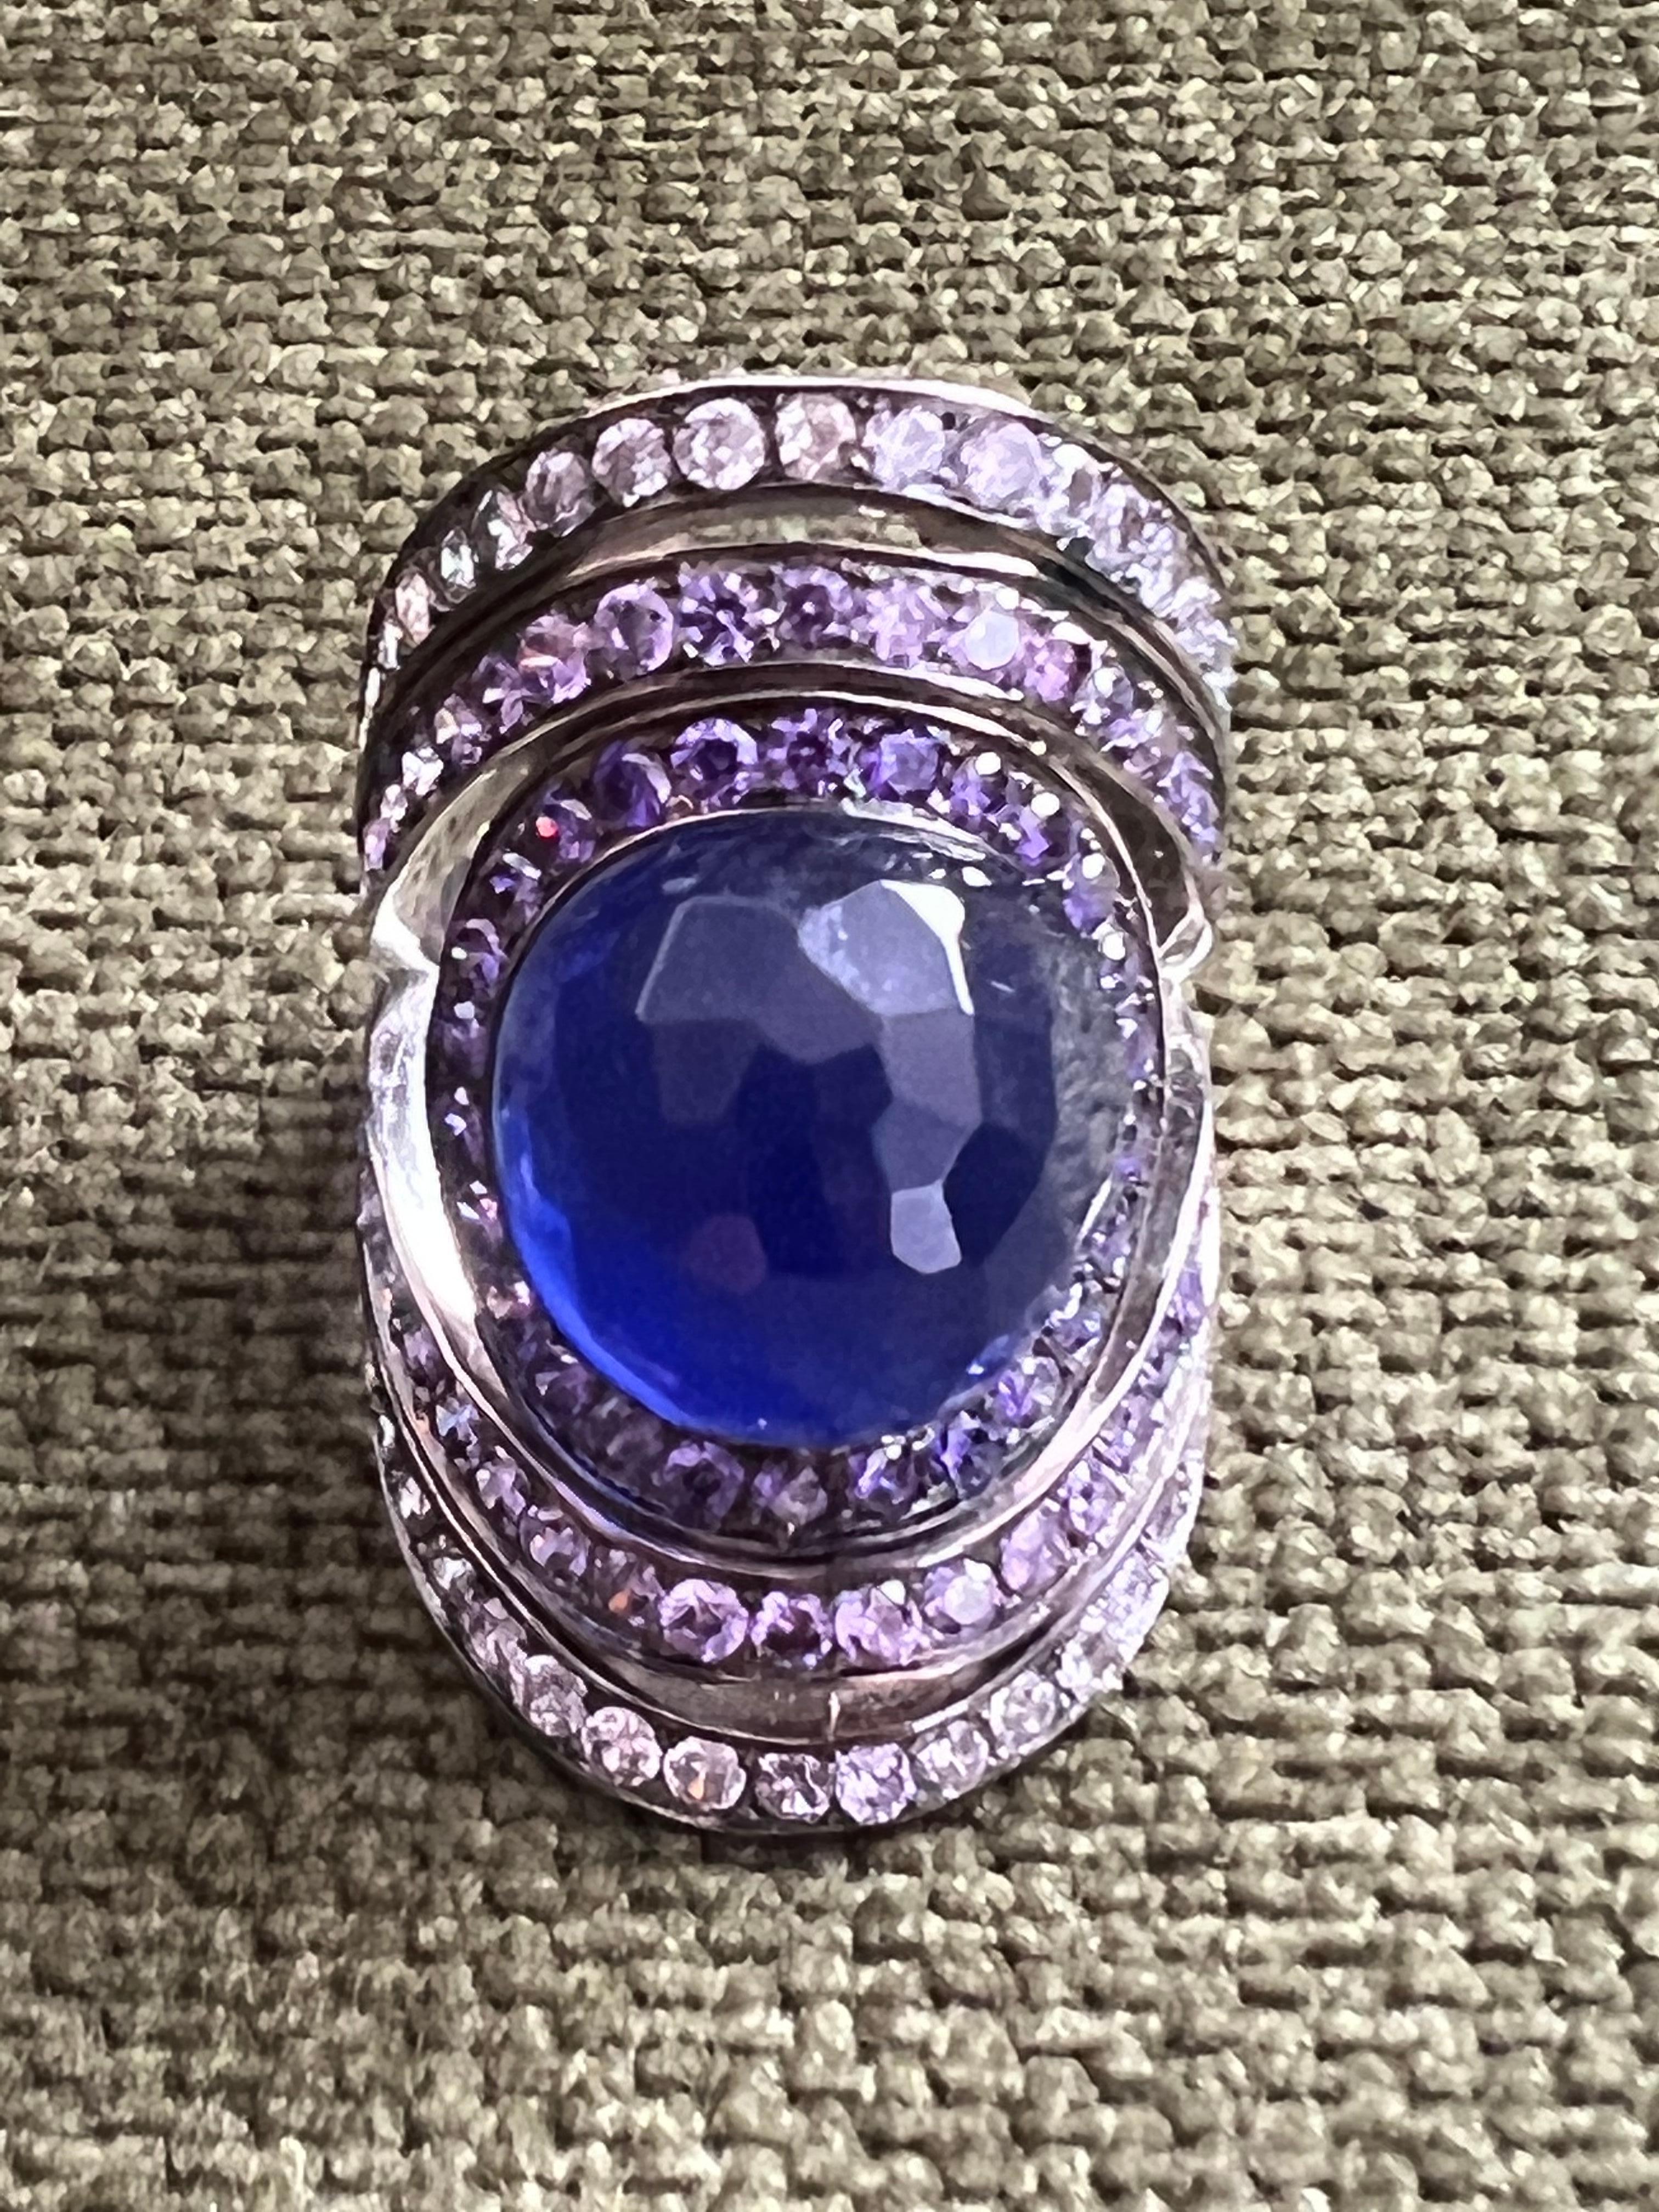 Miriam Salat Fancy Blue Cocktail Ring. 
White Topaz 
Blue Resin 
Blue and Purple Topaz 
Sterling silver 
Signed MRM
Comes with a Miriam Salat pouch. 
70s style 
Size 7 
Can be resized 